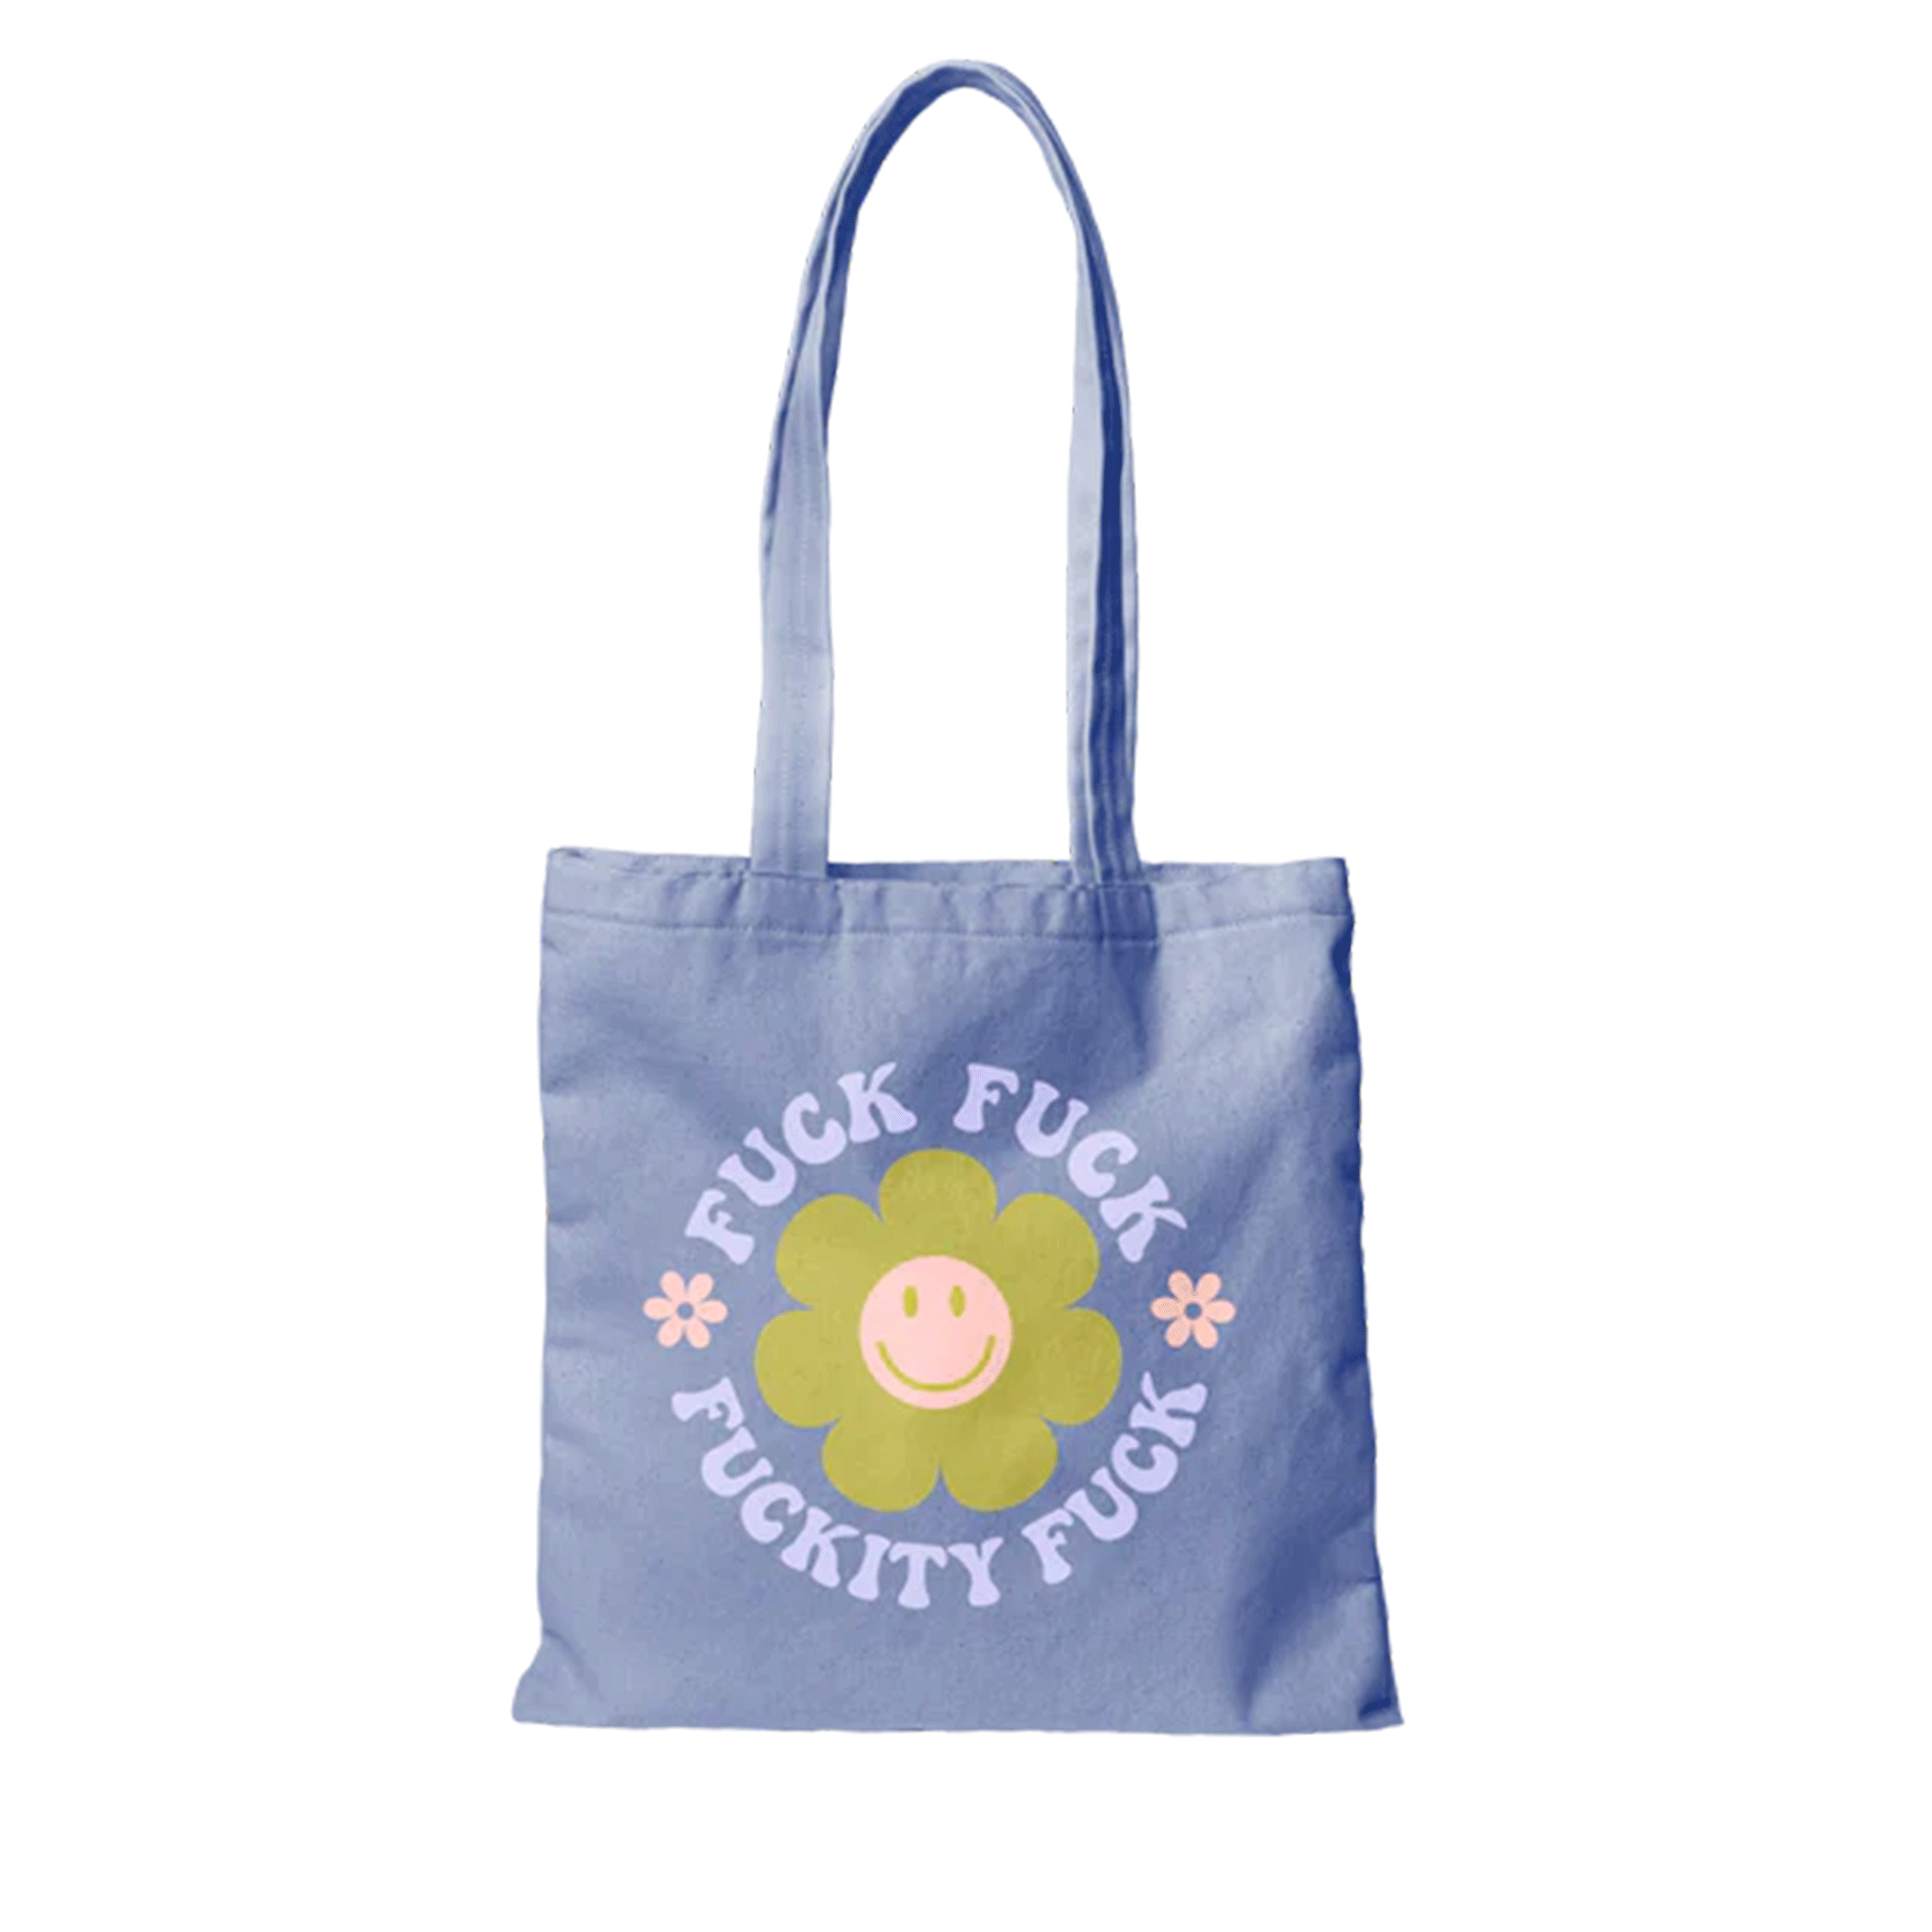 On a white background is a blue canvas tote bag with a smiley daisy graphic and text around the daisy that reads &quot;Fuck Fuck Fuckity Fuck&quot;.